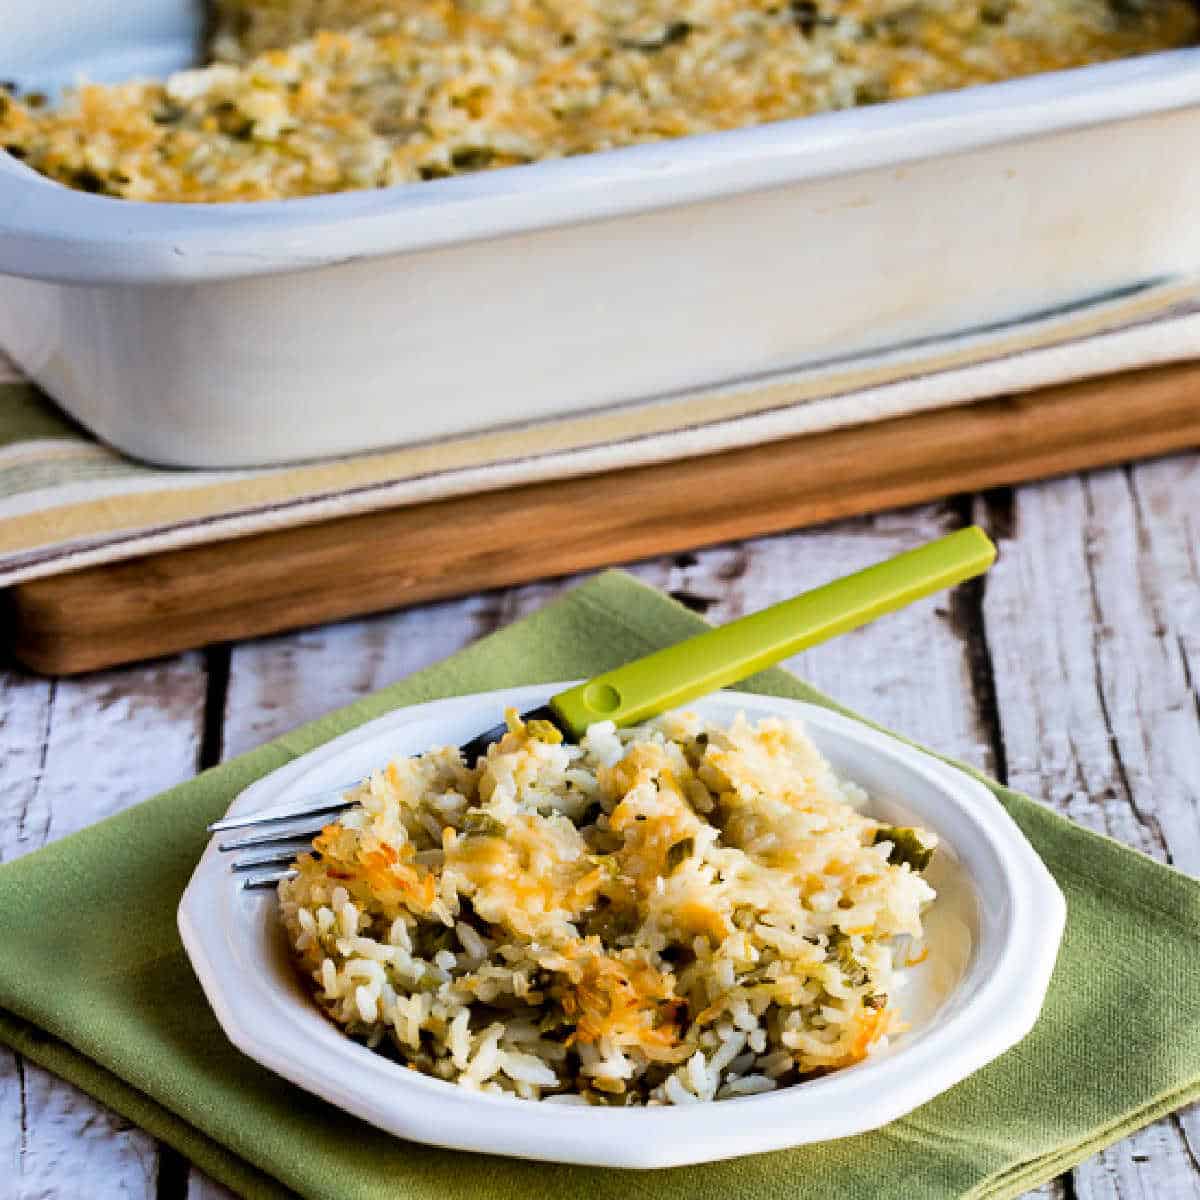 Slow Cooker Rice Casserole shown in casserole croc-pot with one serving on plate